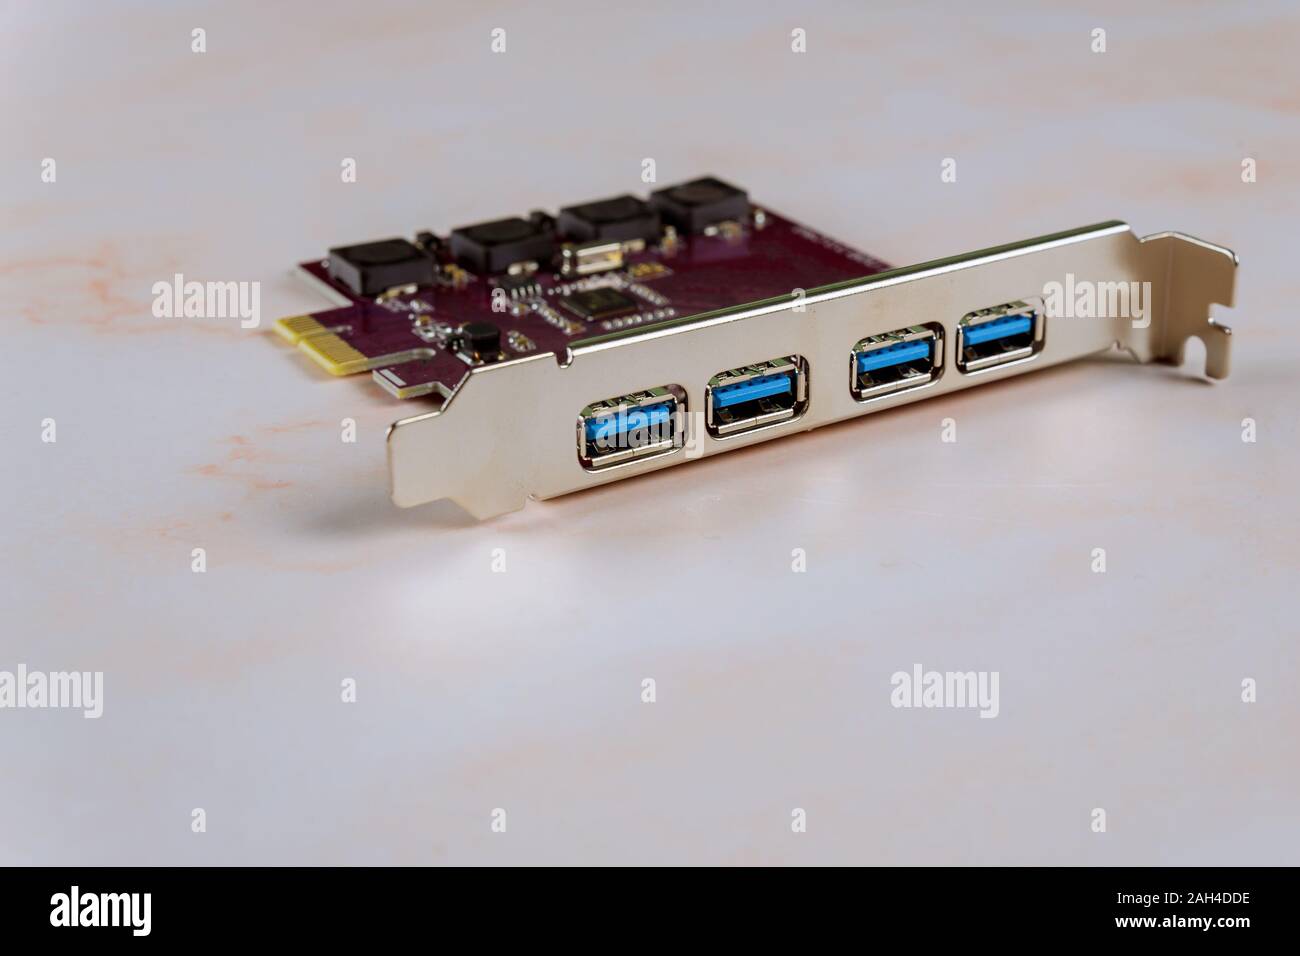 4 Ports USB 3.0 Superspeed 5Gbps PCI Express Expansion Card Computer part. Stock Photo